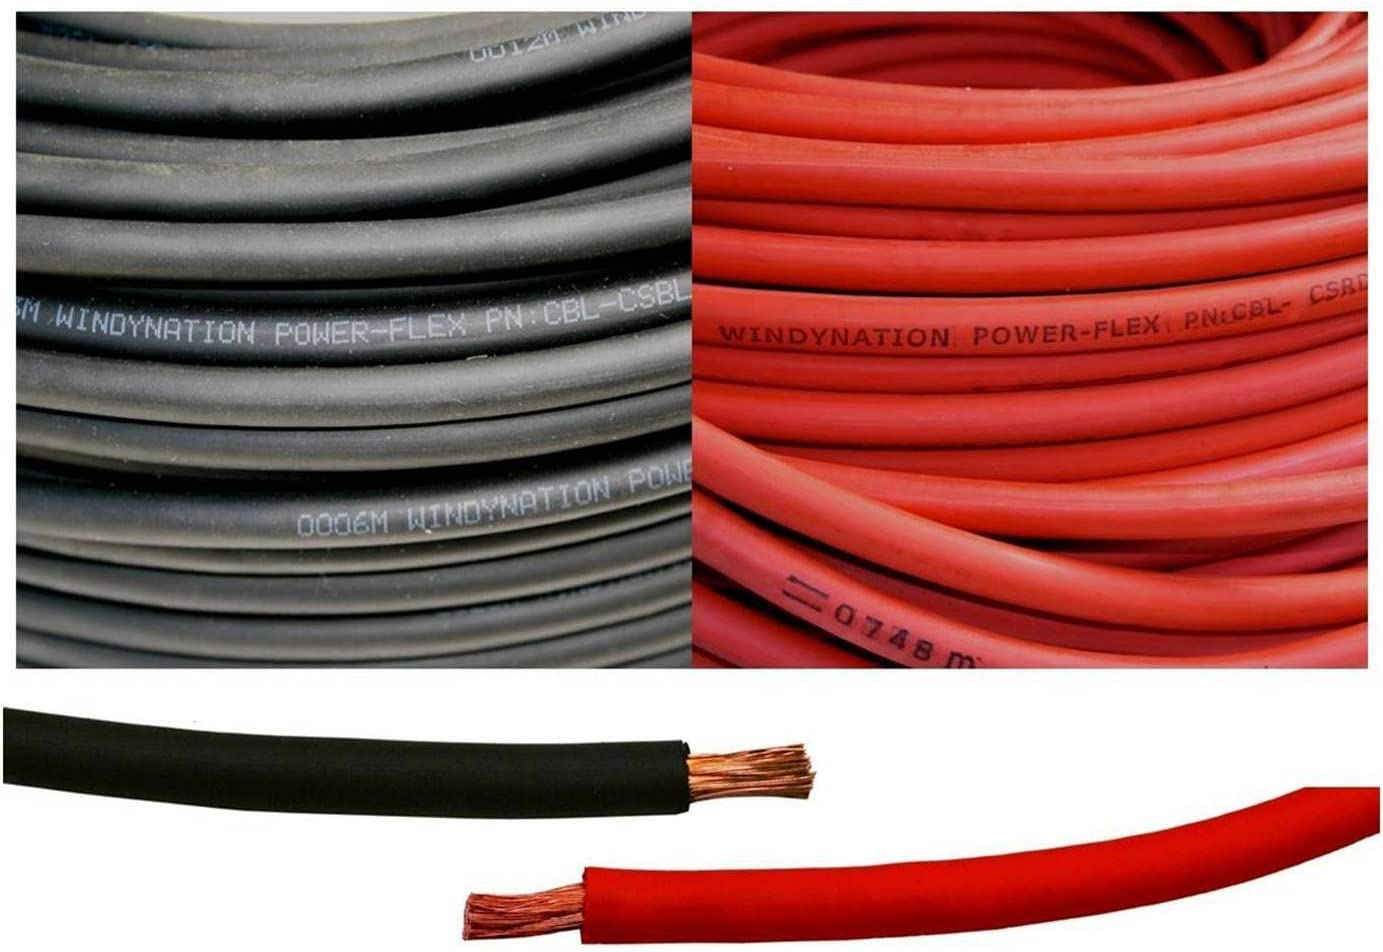 Jehu Garcia WindyNation 6 Gauge 6 AWG 2.5 Feet Red + 2.5 Feet Black Welding  Battery Pure Copper Flexible Cable + 10pcs of 3/8 Tinned Copper Cable Lug  Terminal Connectors + 3 Feet Black Heat Shrink Tubing – Jag35